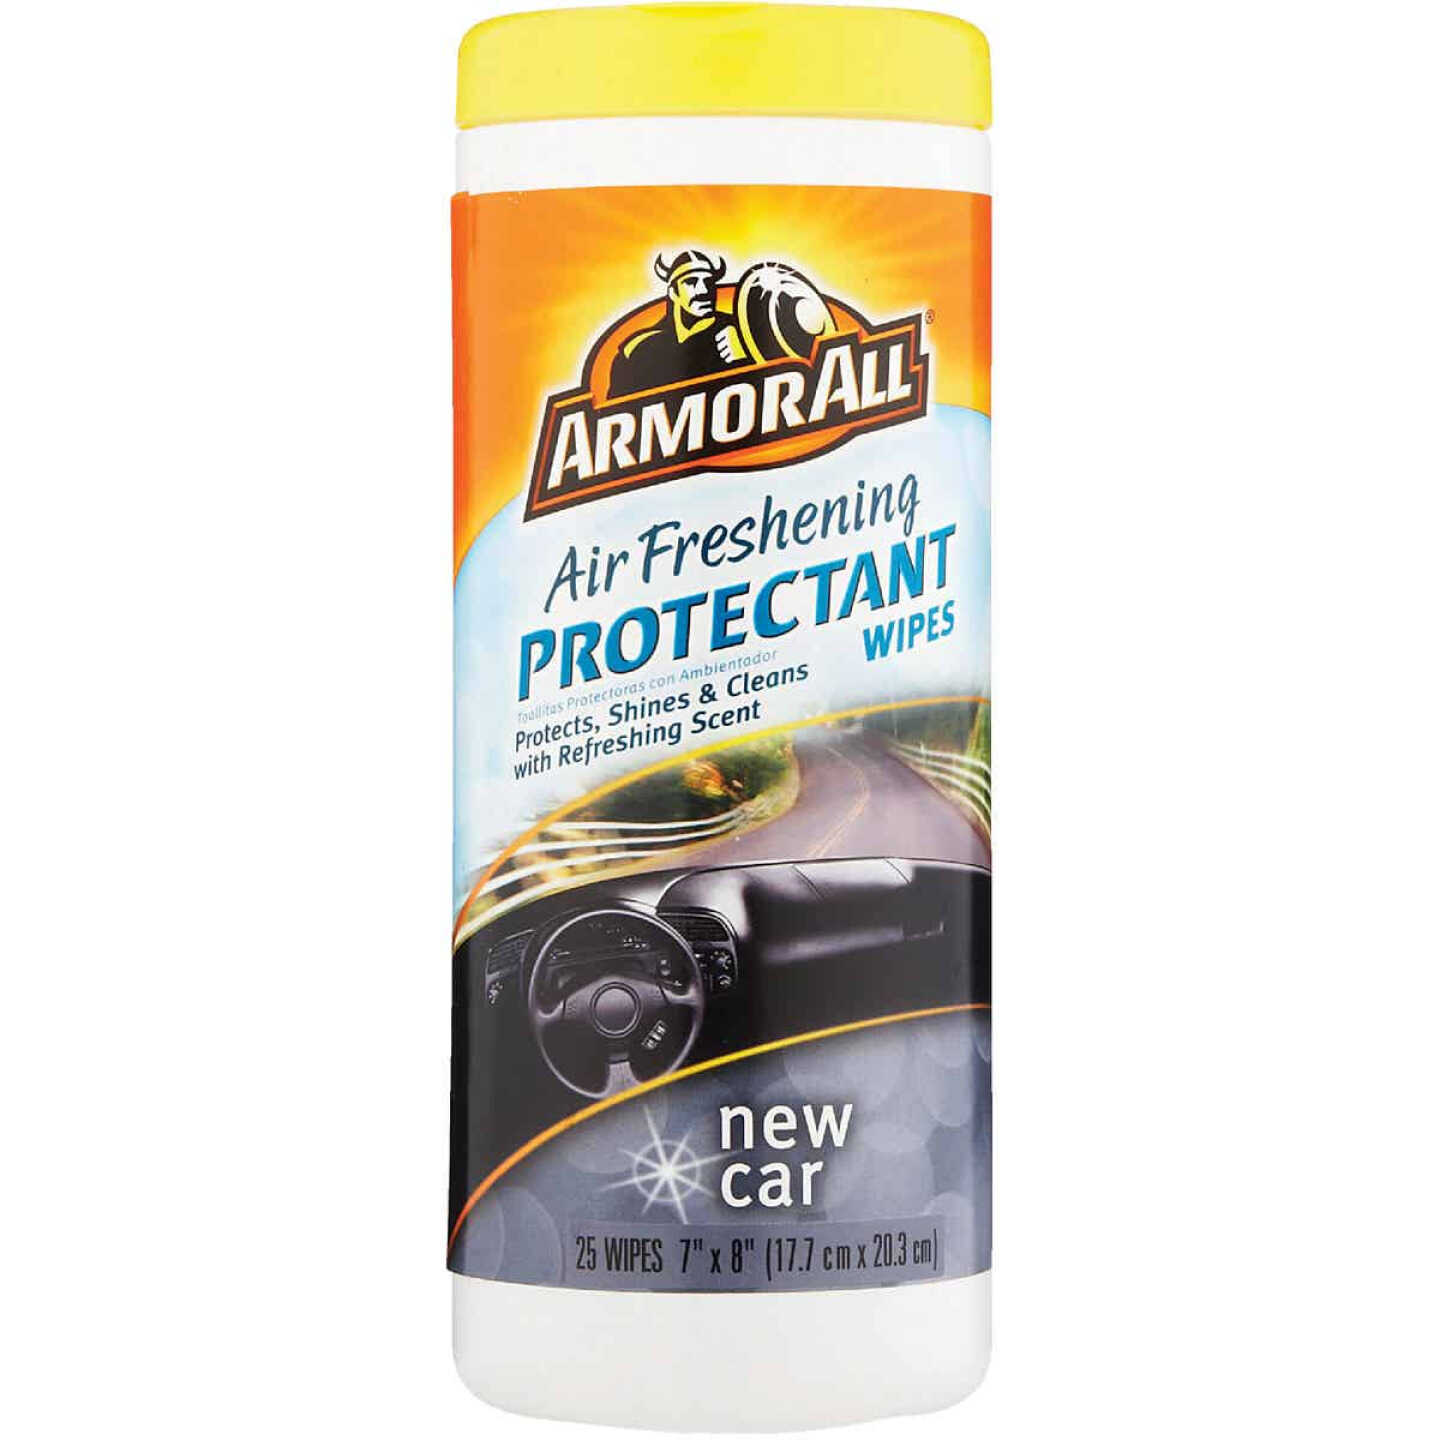 Armor All Protectant